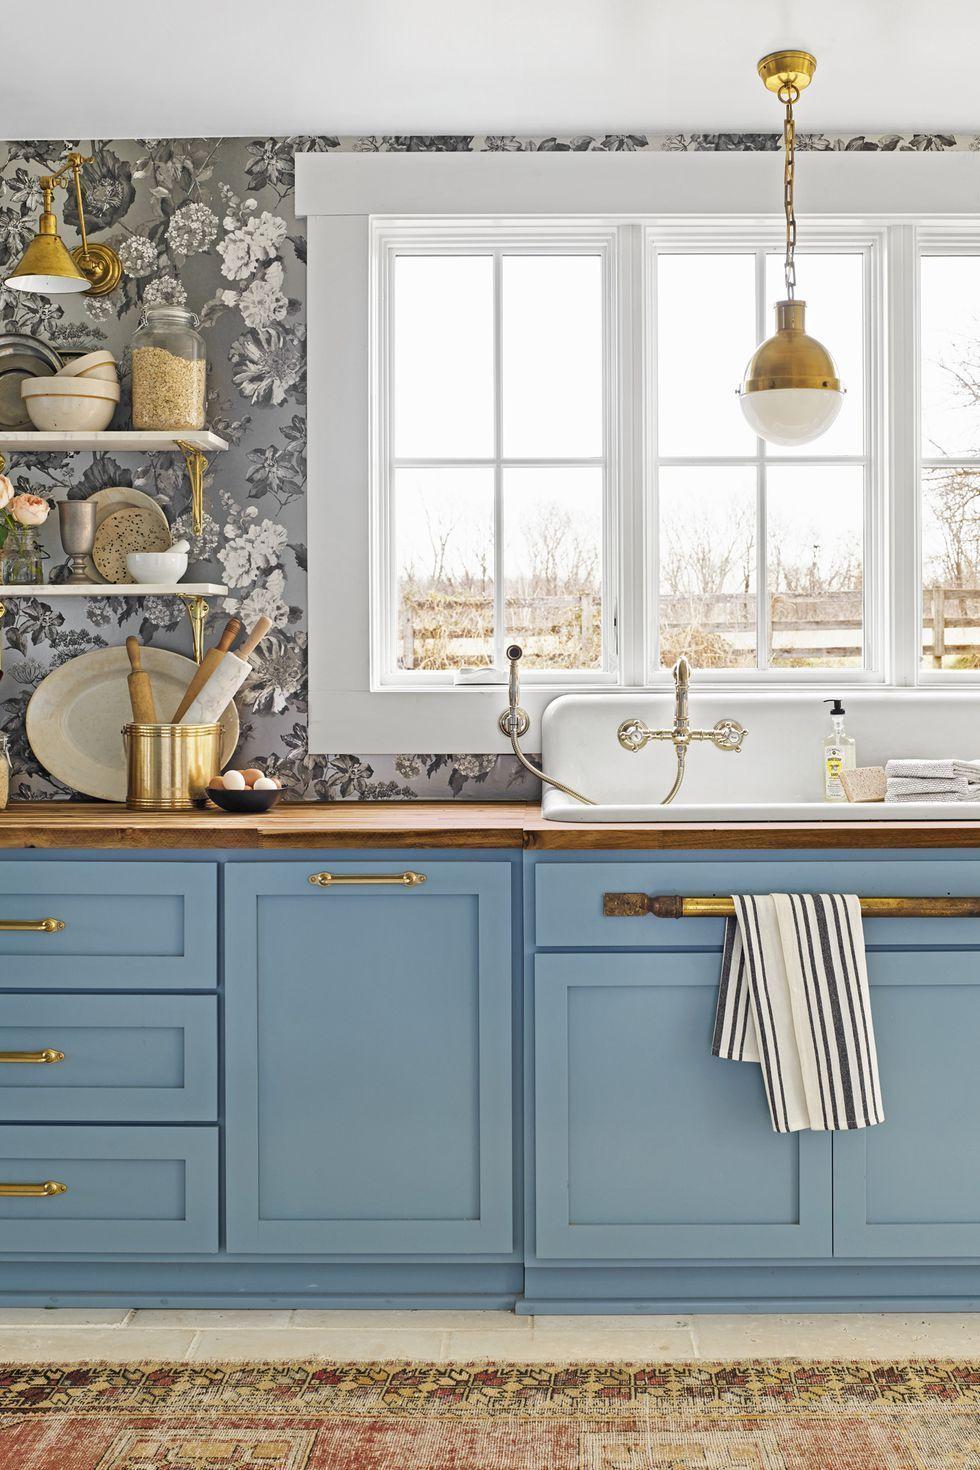 39 Kitchen Trends for 2022 That We Predict Will Be Everywhere